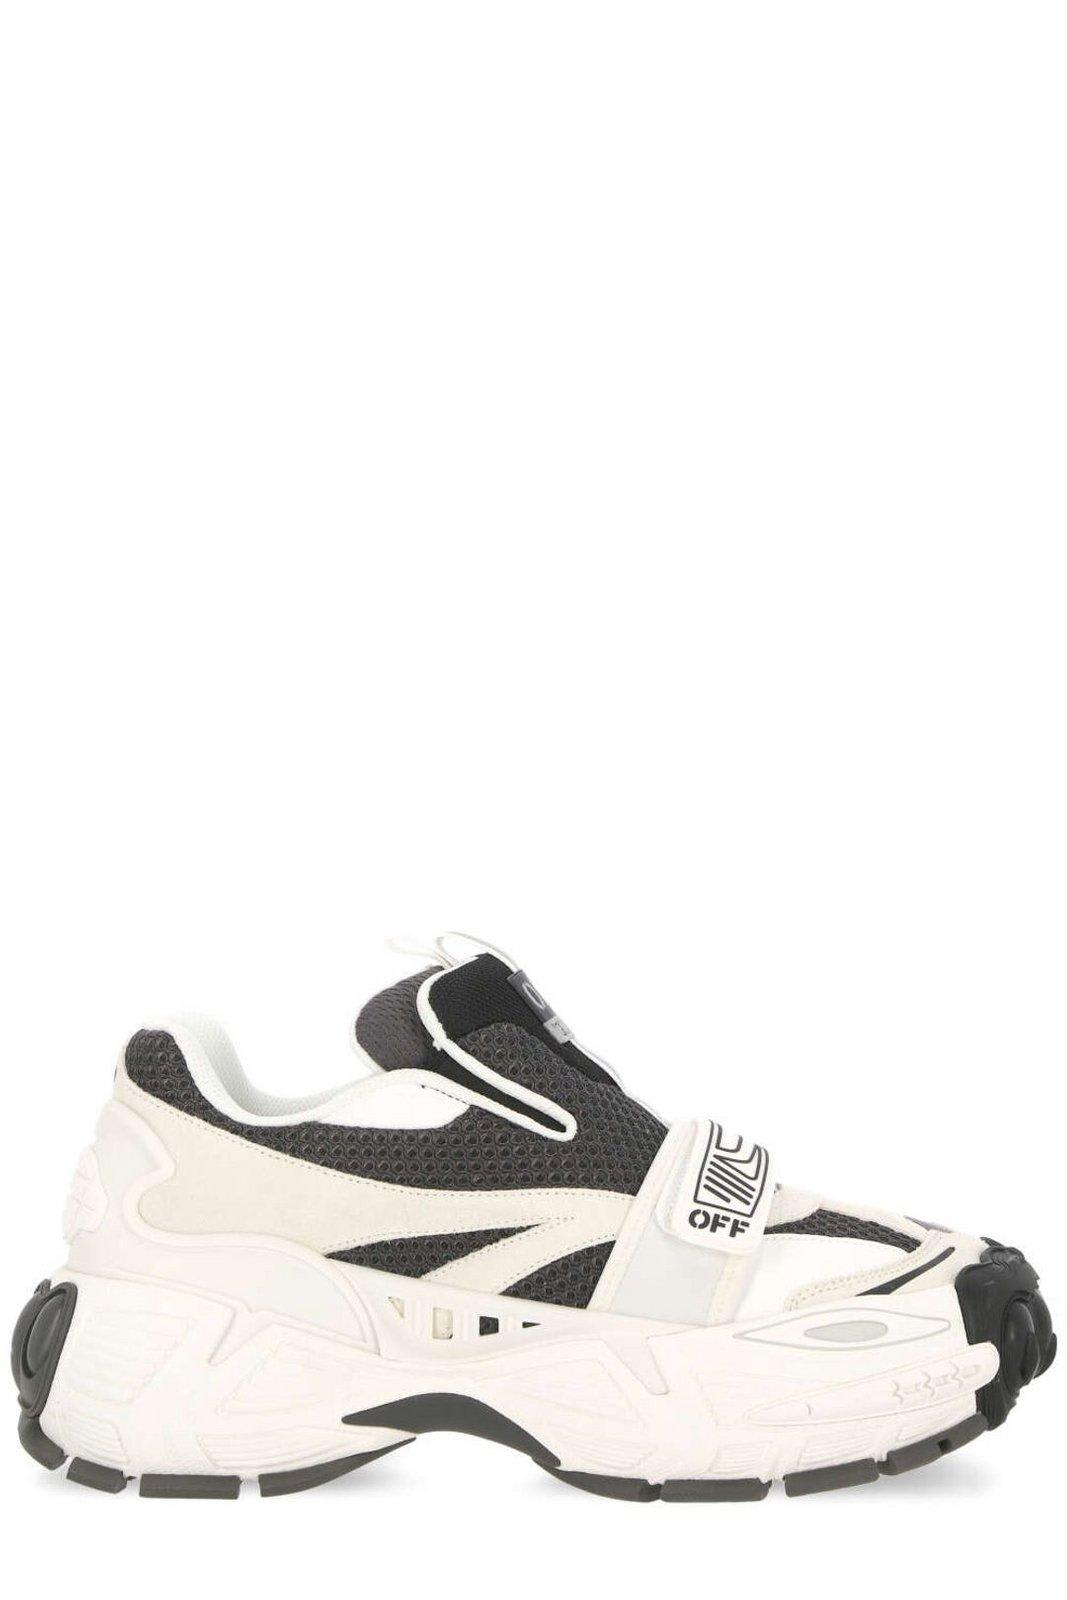 Off-white Round Toe Lace-up Sneakers In White Black